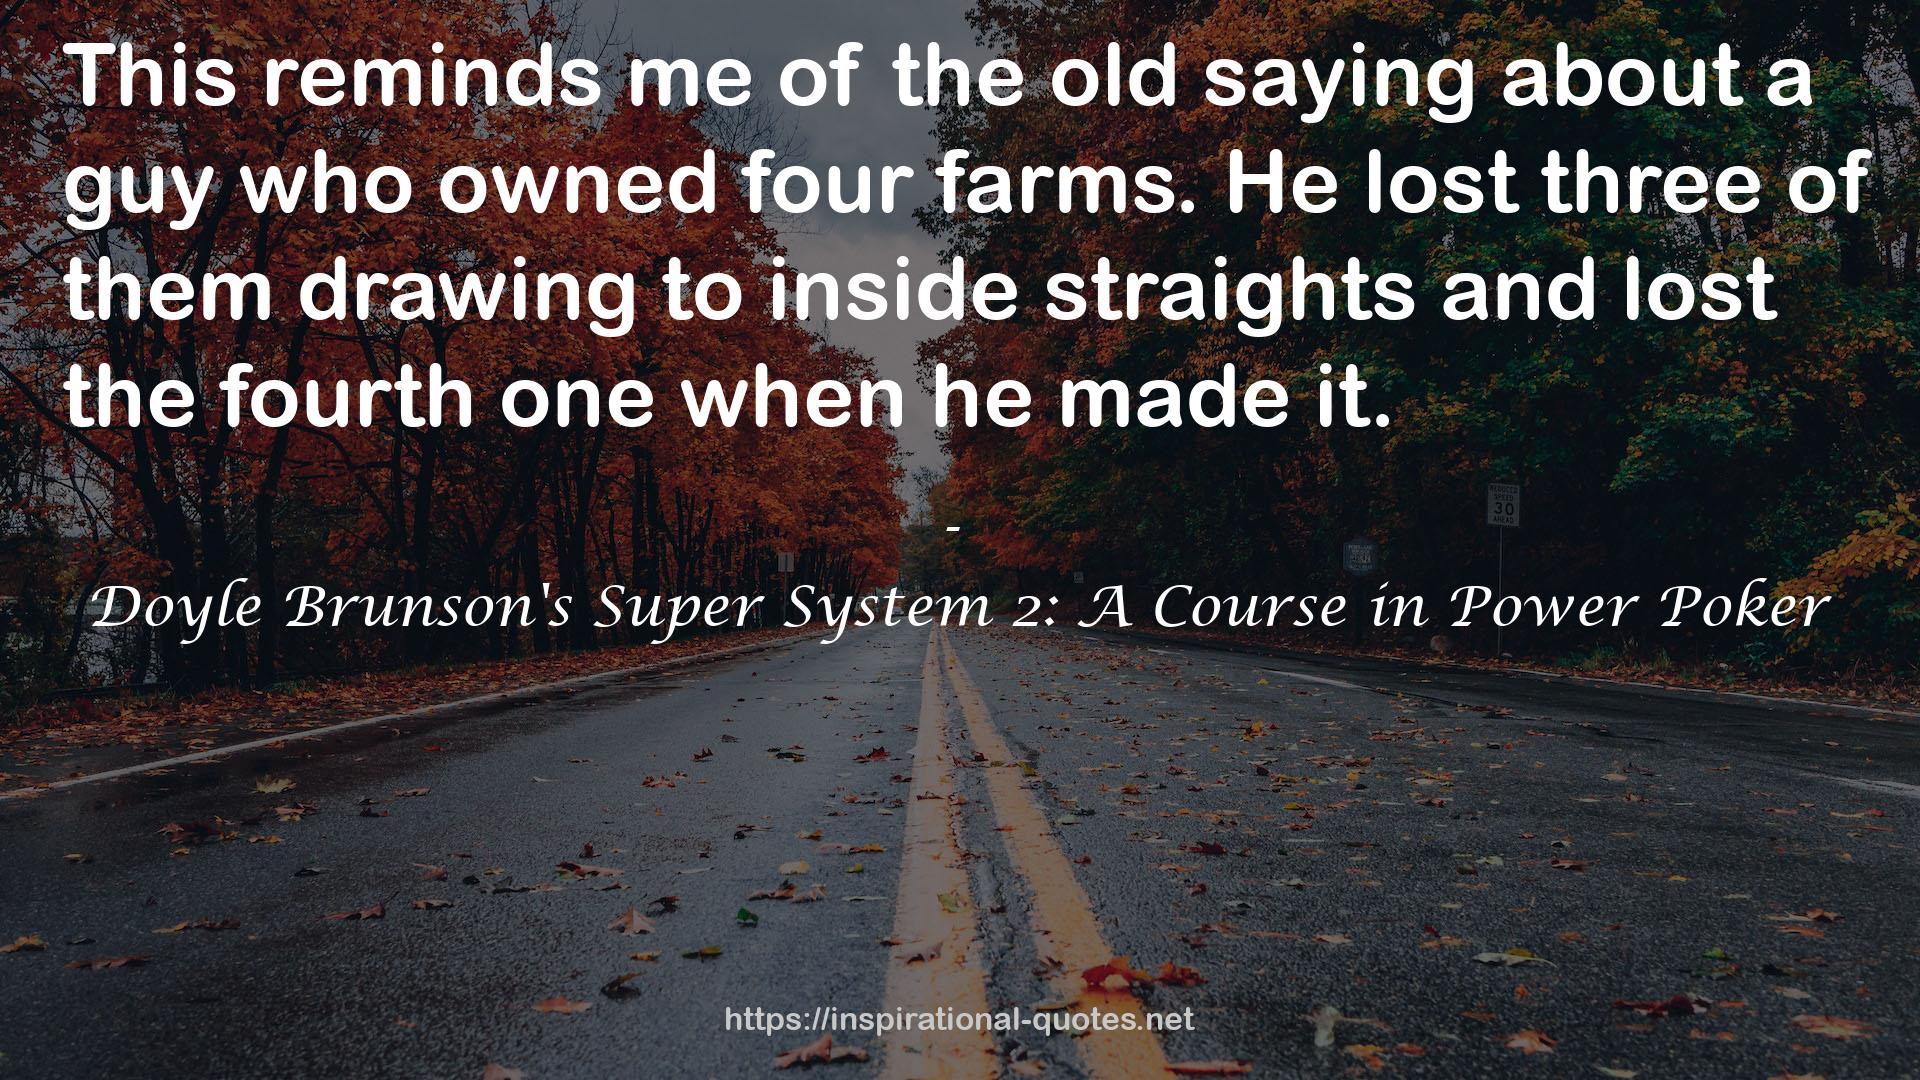 Doyle Brunson's Super System 2: A Course in Power Poker QUOTES